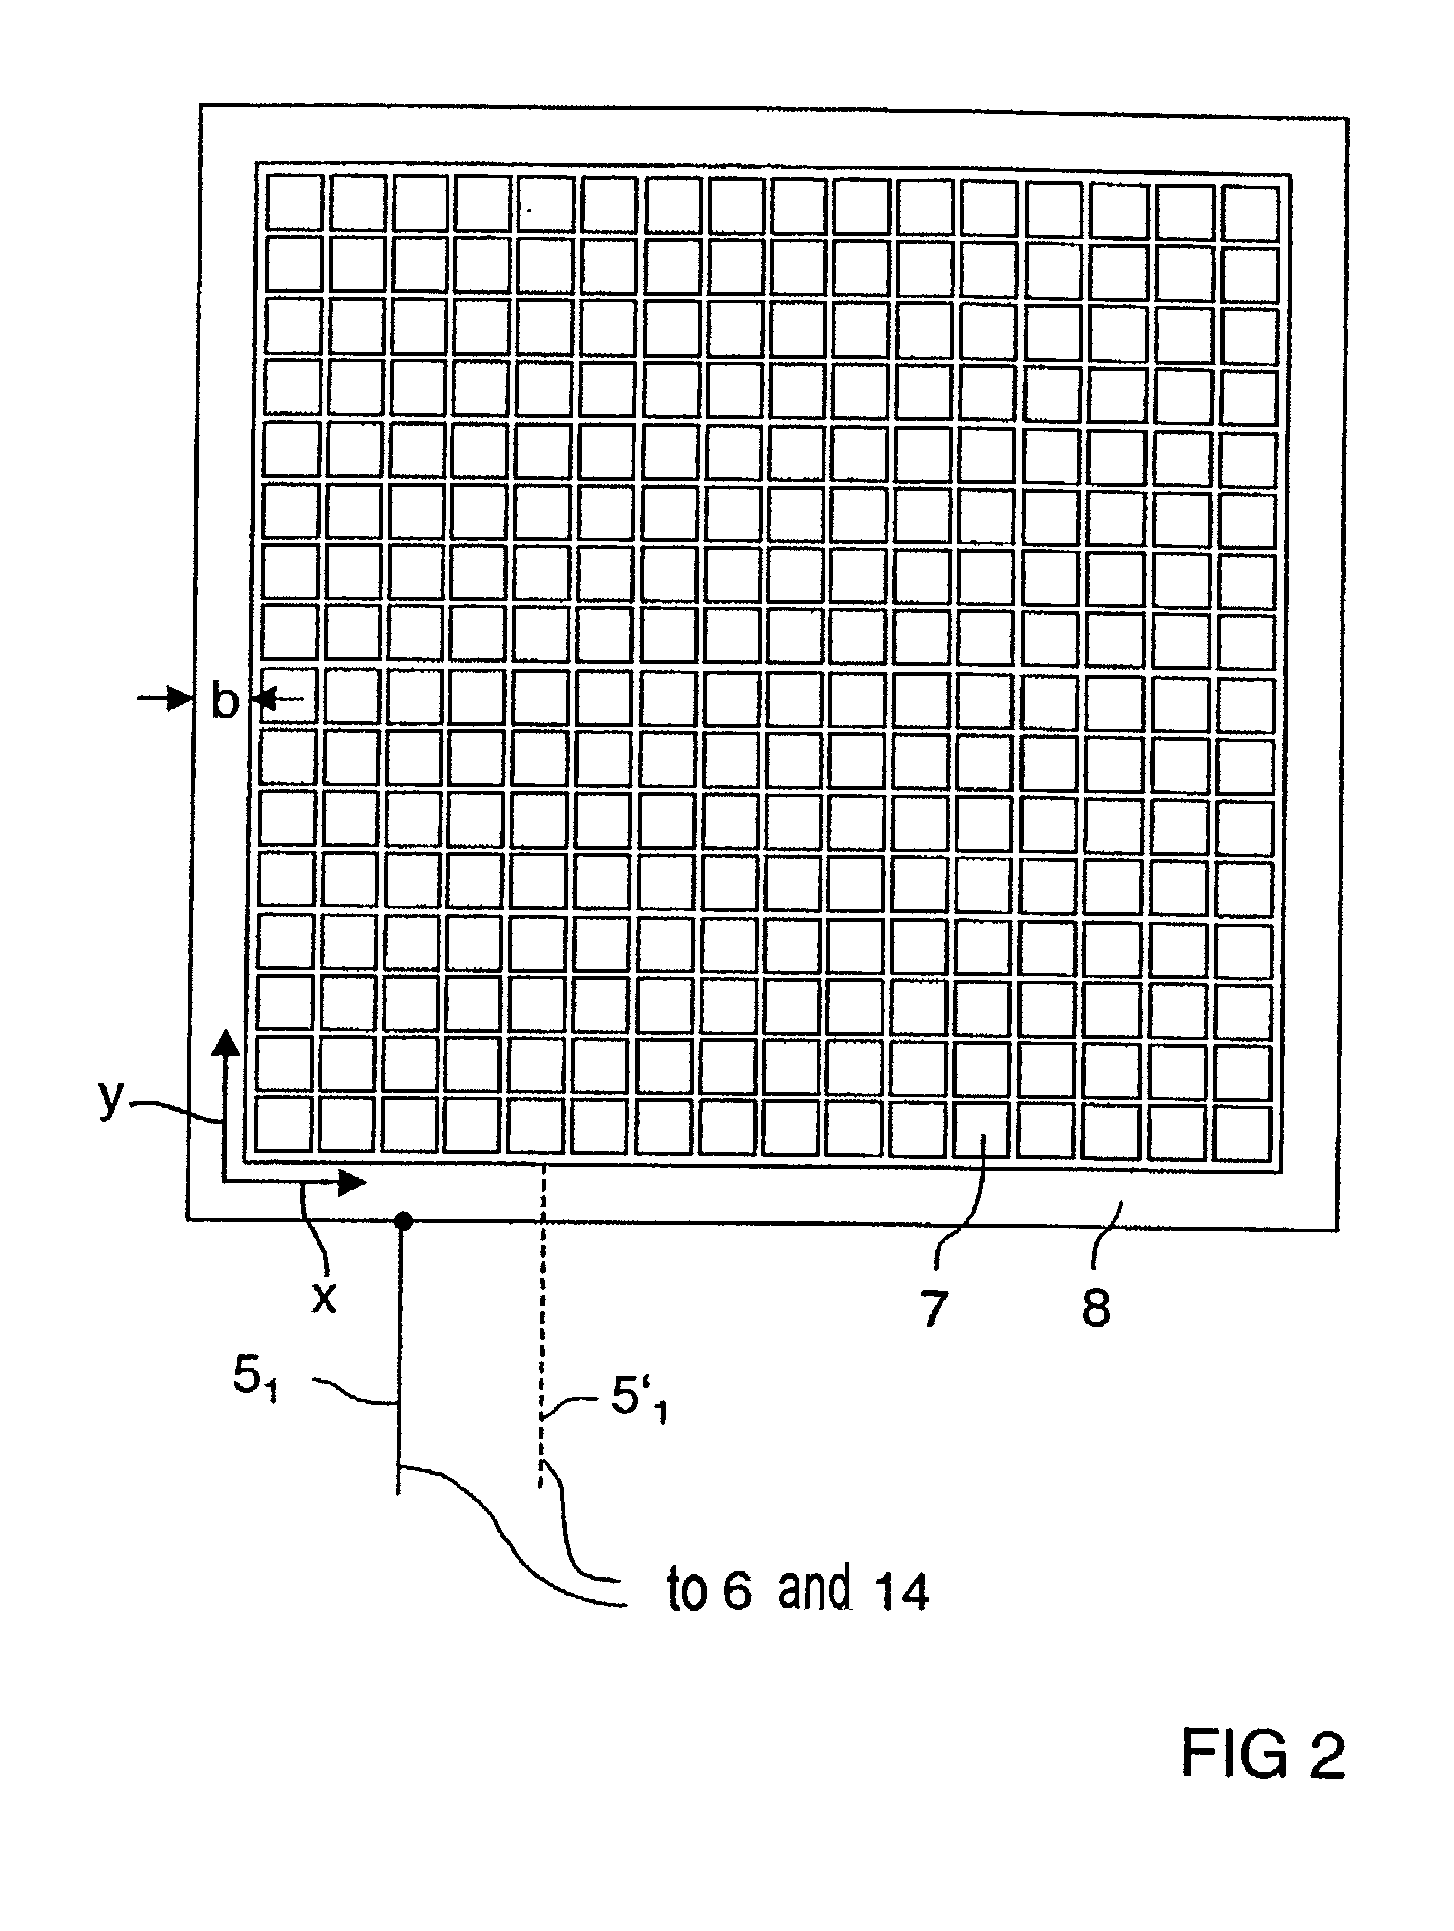 Measurement system for examining a section of tissue on a patient and the use of a measurement system of this type